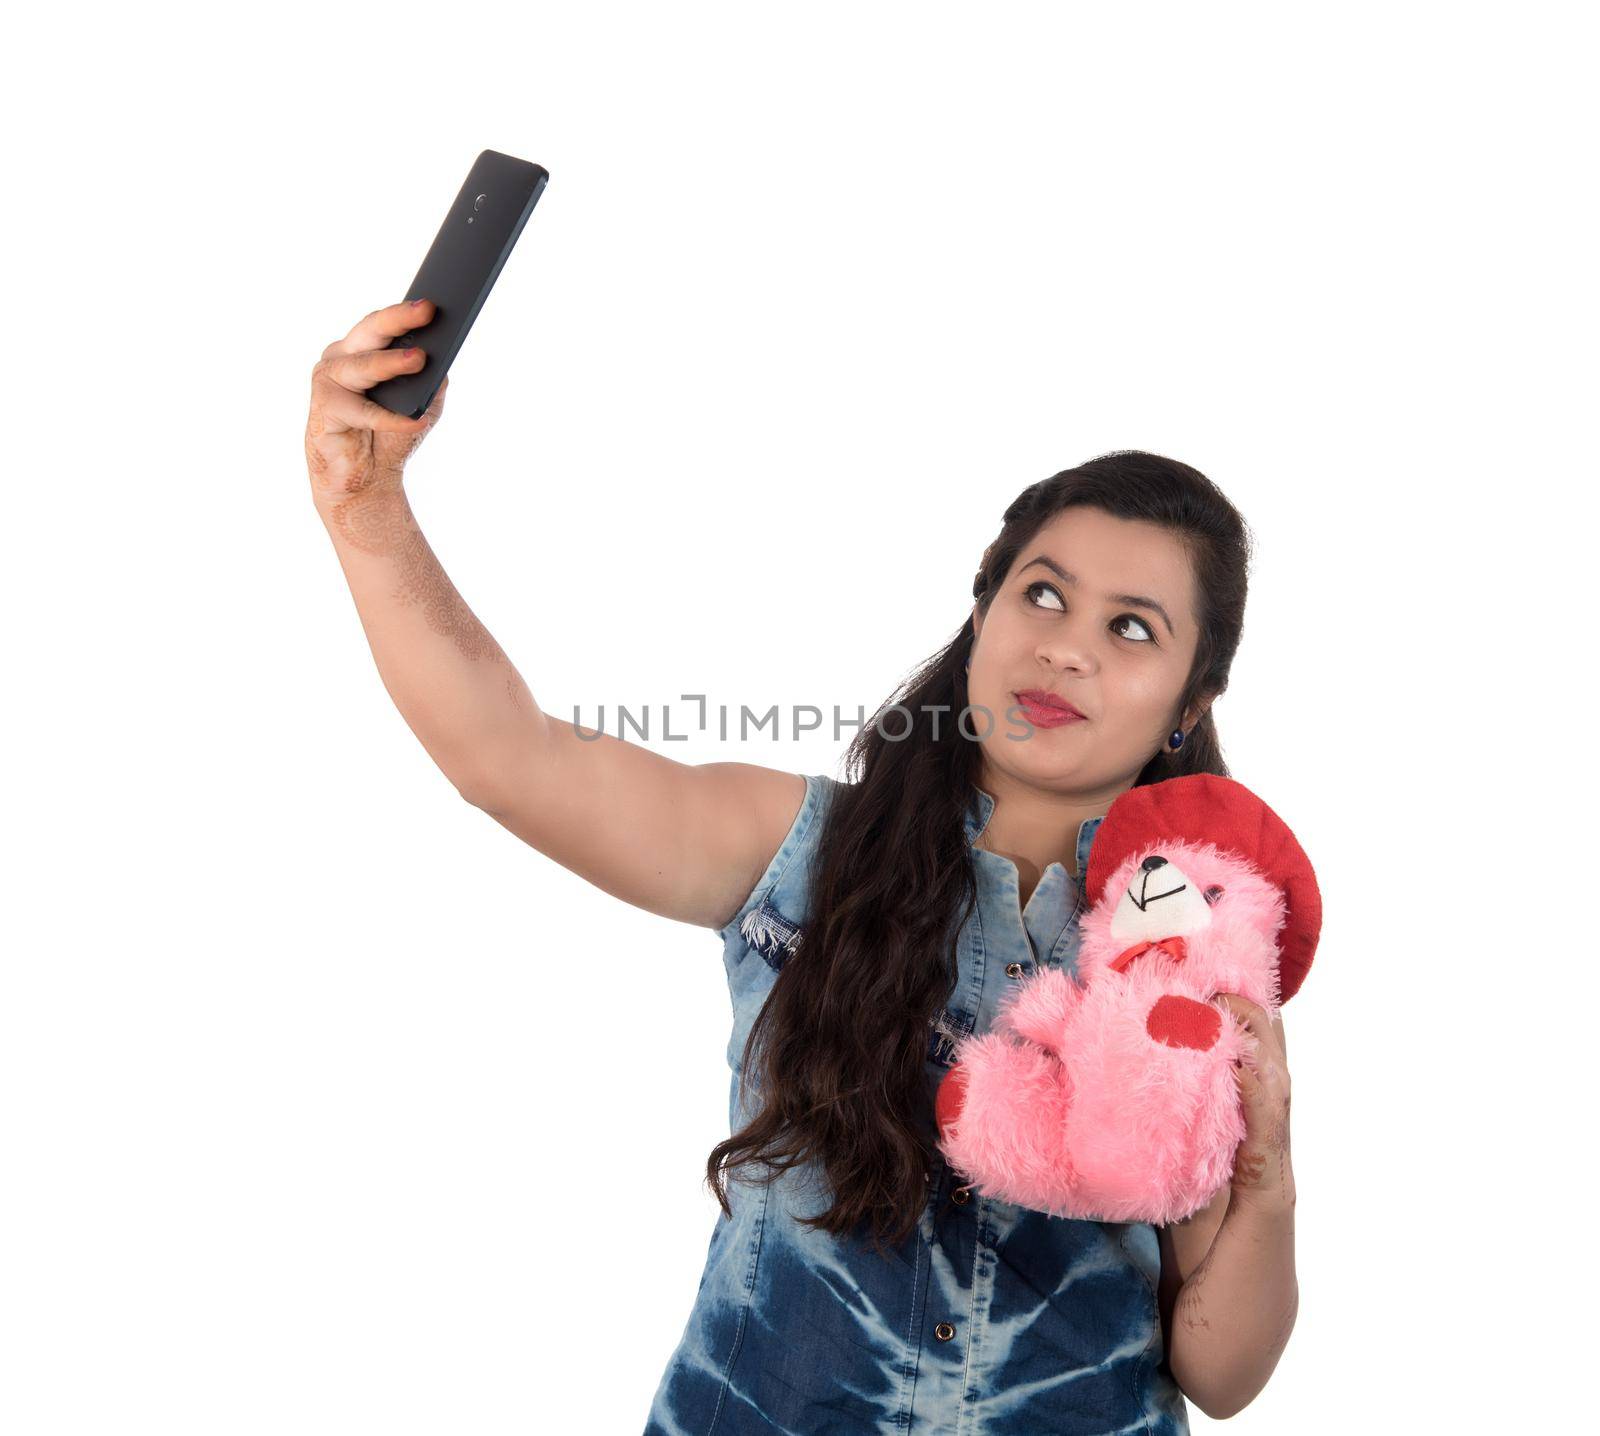 Woman taking picture or selfie with mobile phone and holding teddy bear by DipakShelare